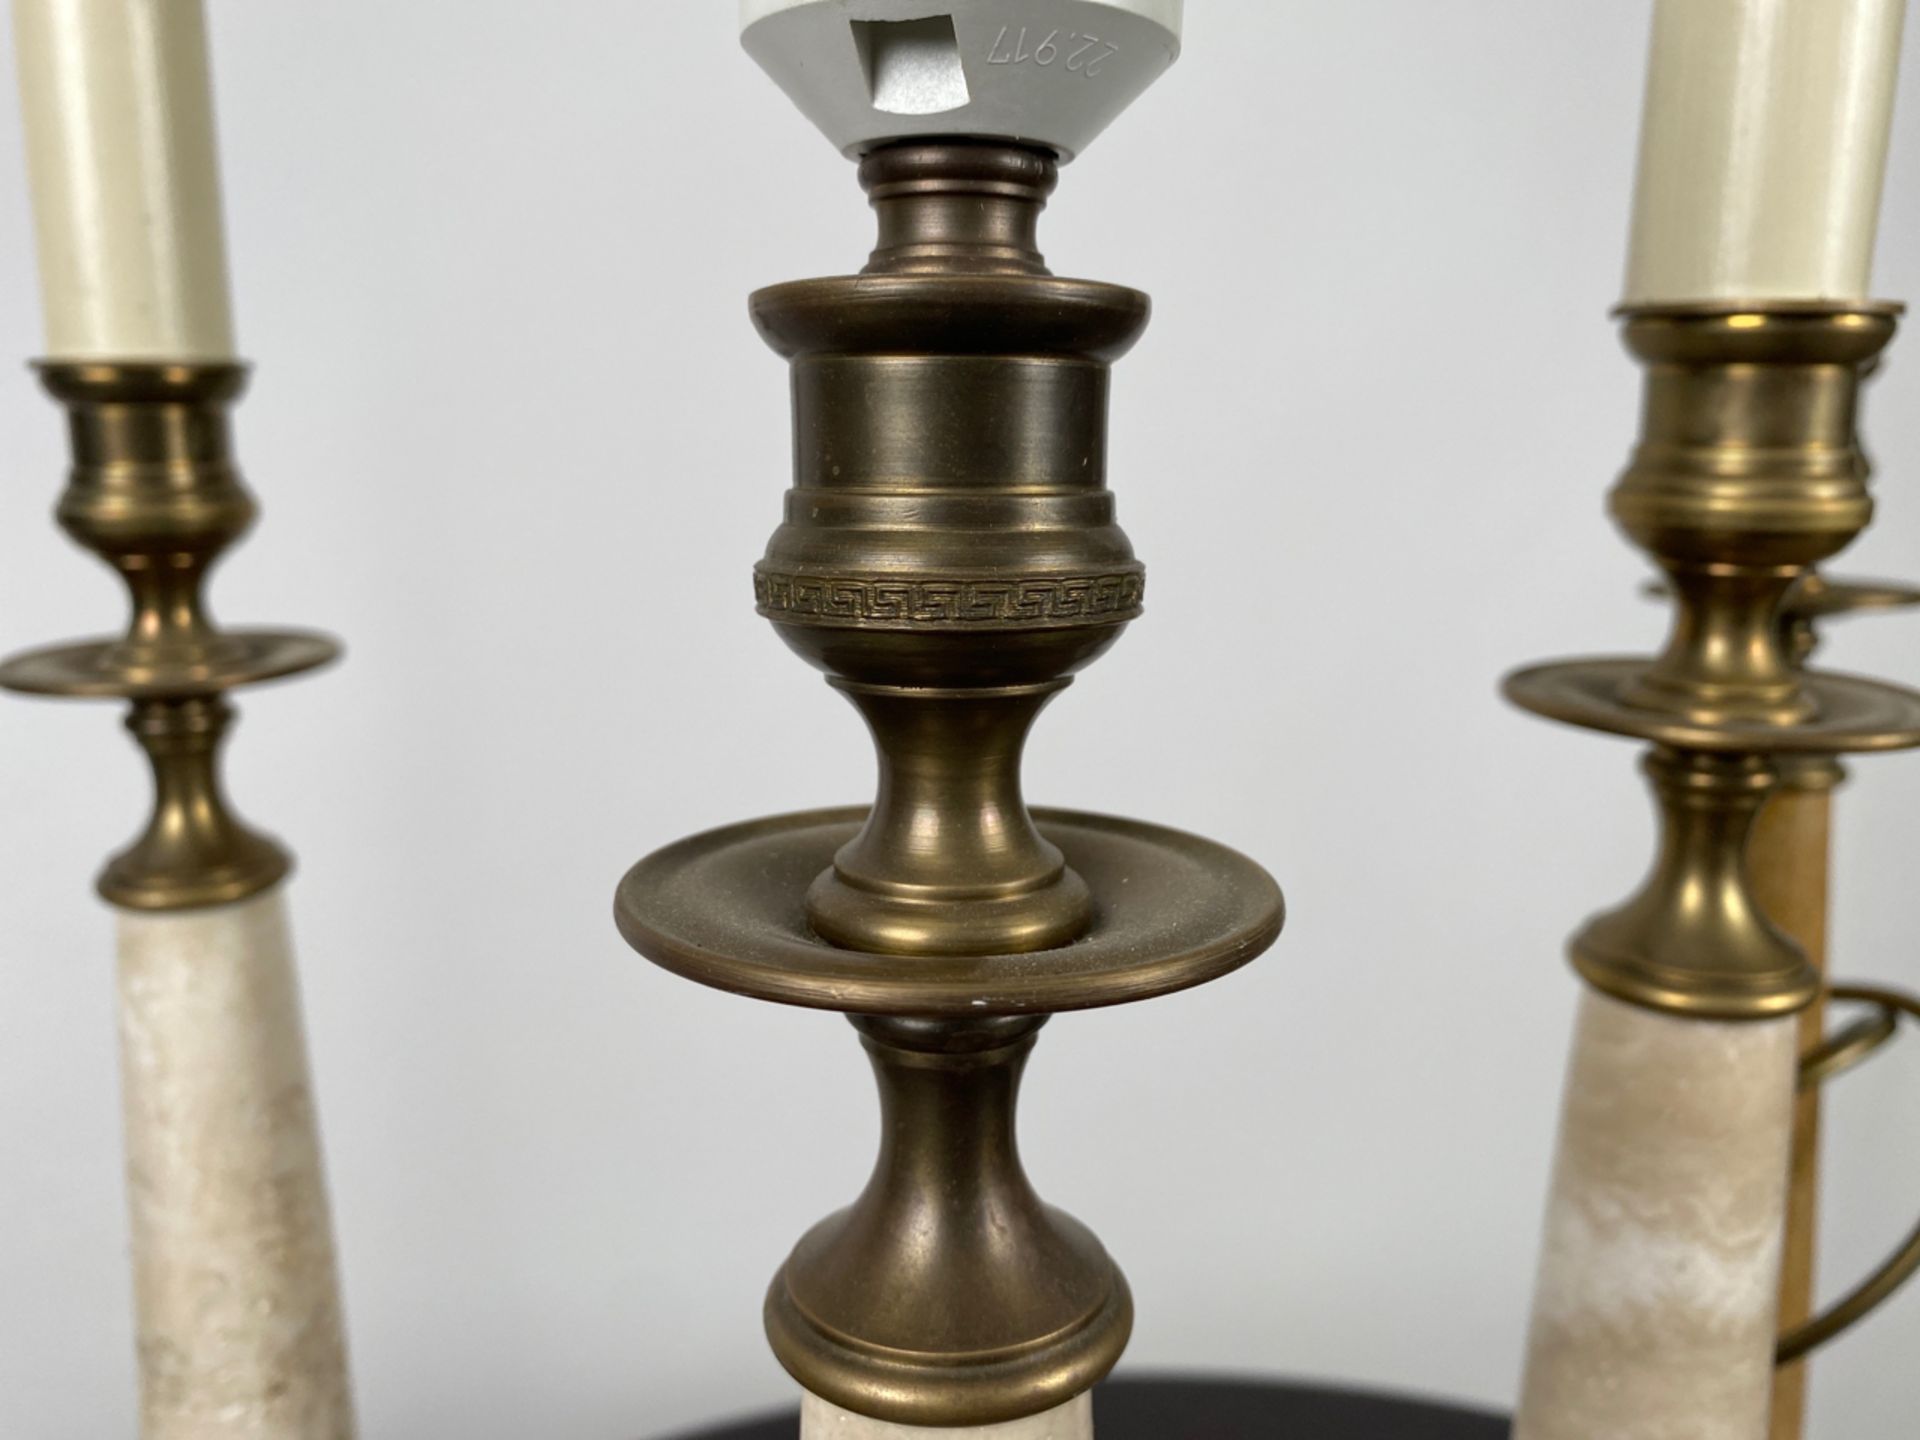 Set of 4 Brass Table Lamps - Image 2 of 4